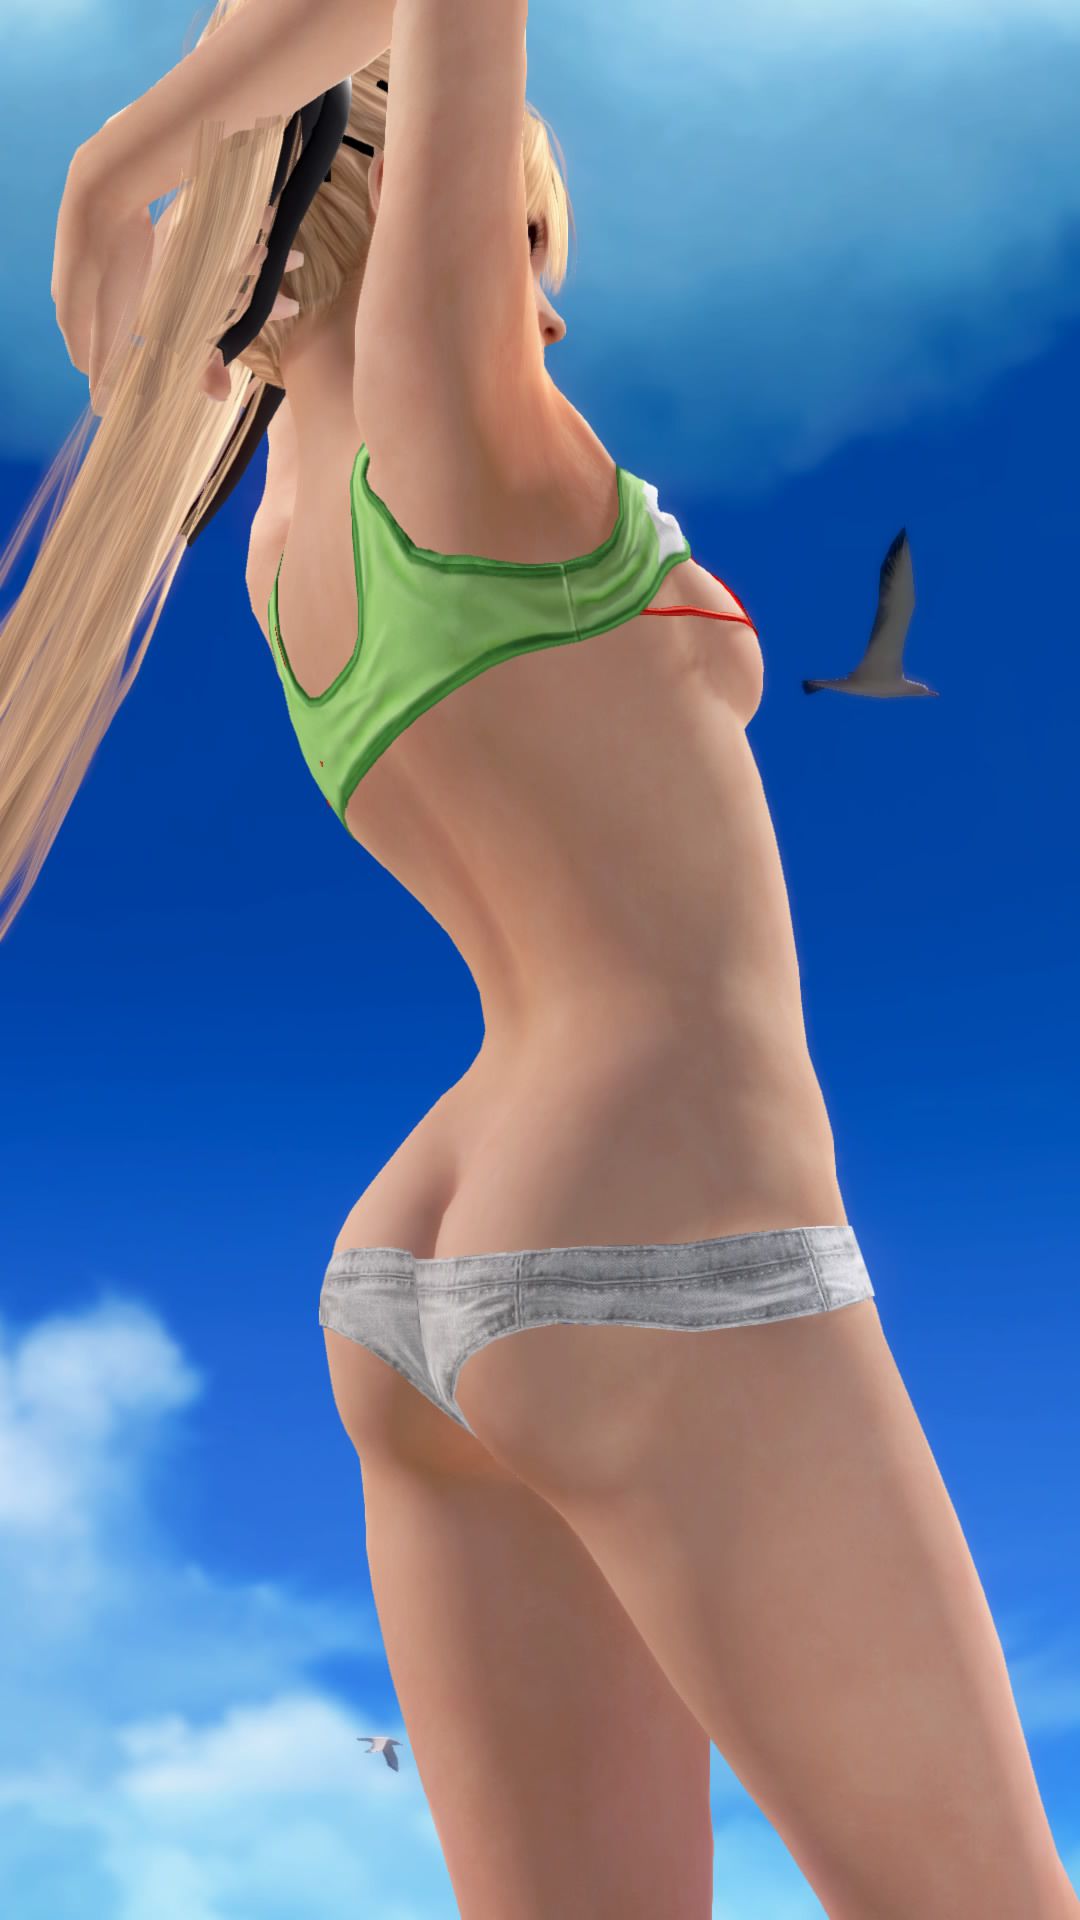 DOAX3 recommend private shooting Association (Division of Rose-Marie) in swimsuit 12